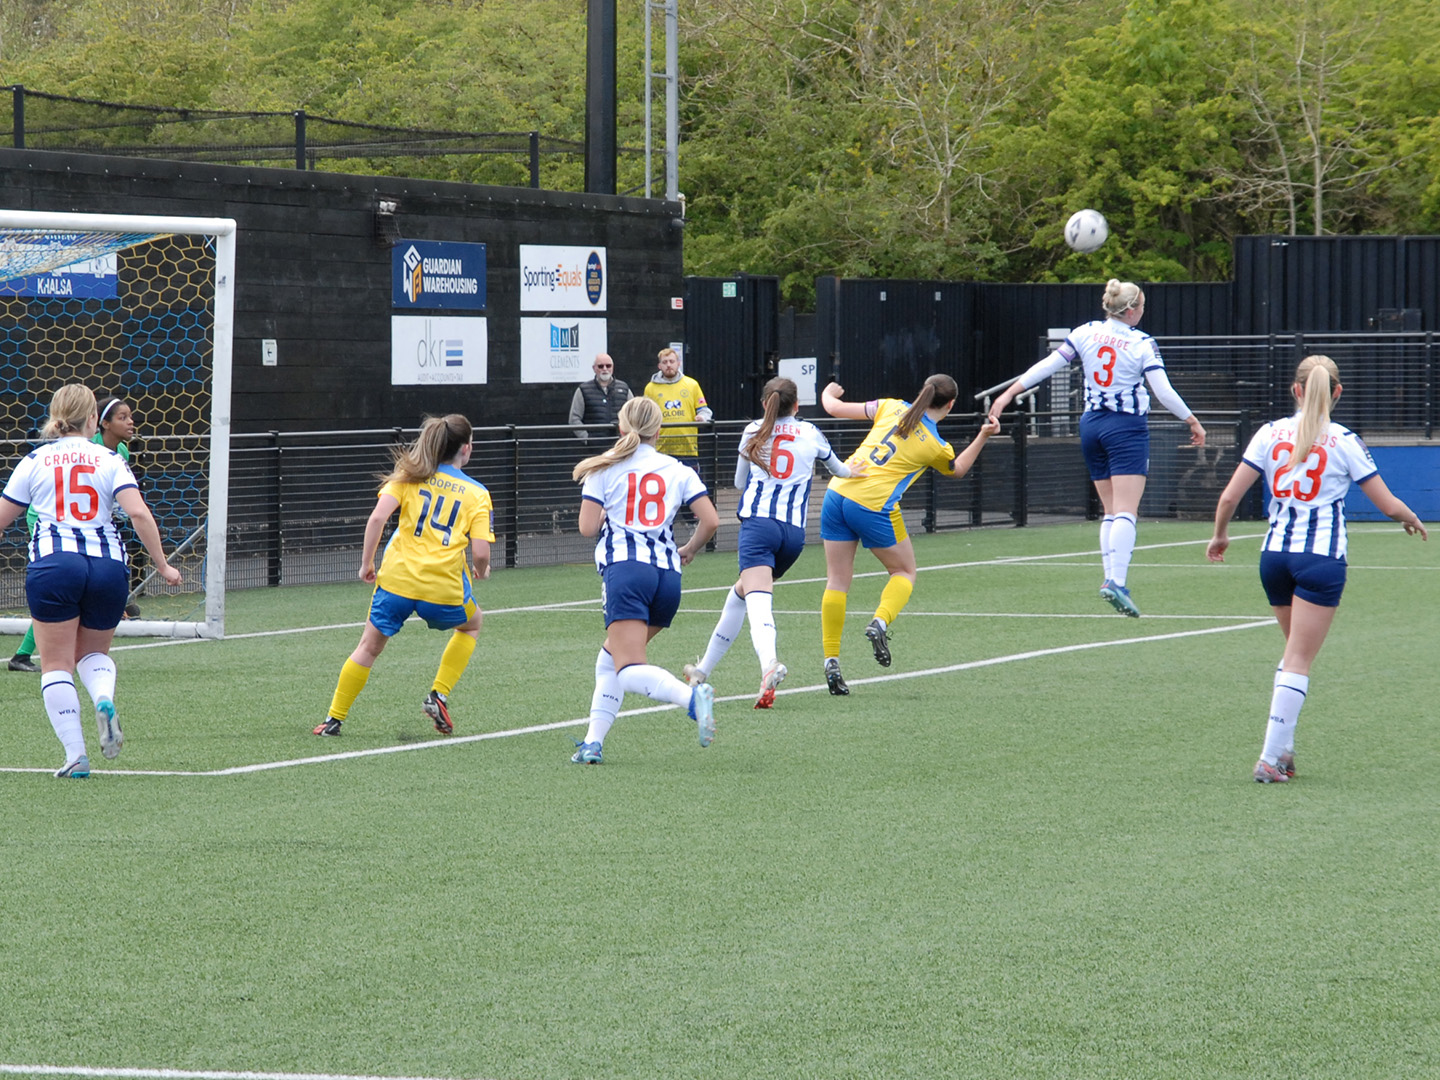 An image of Albion defending a corner against Sporting Khalsa